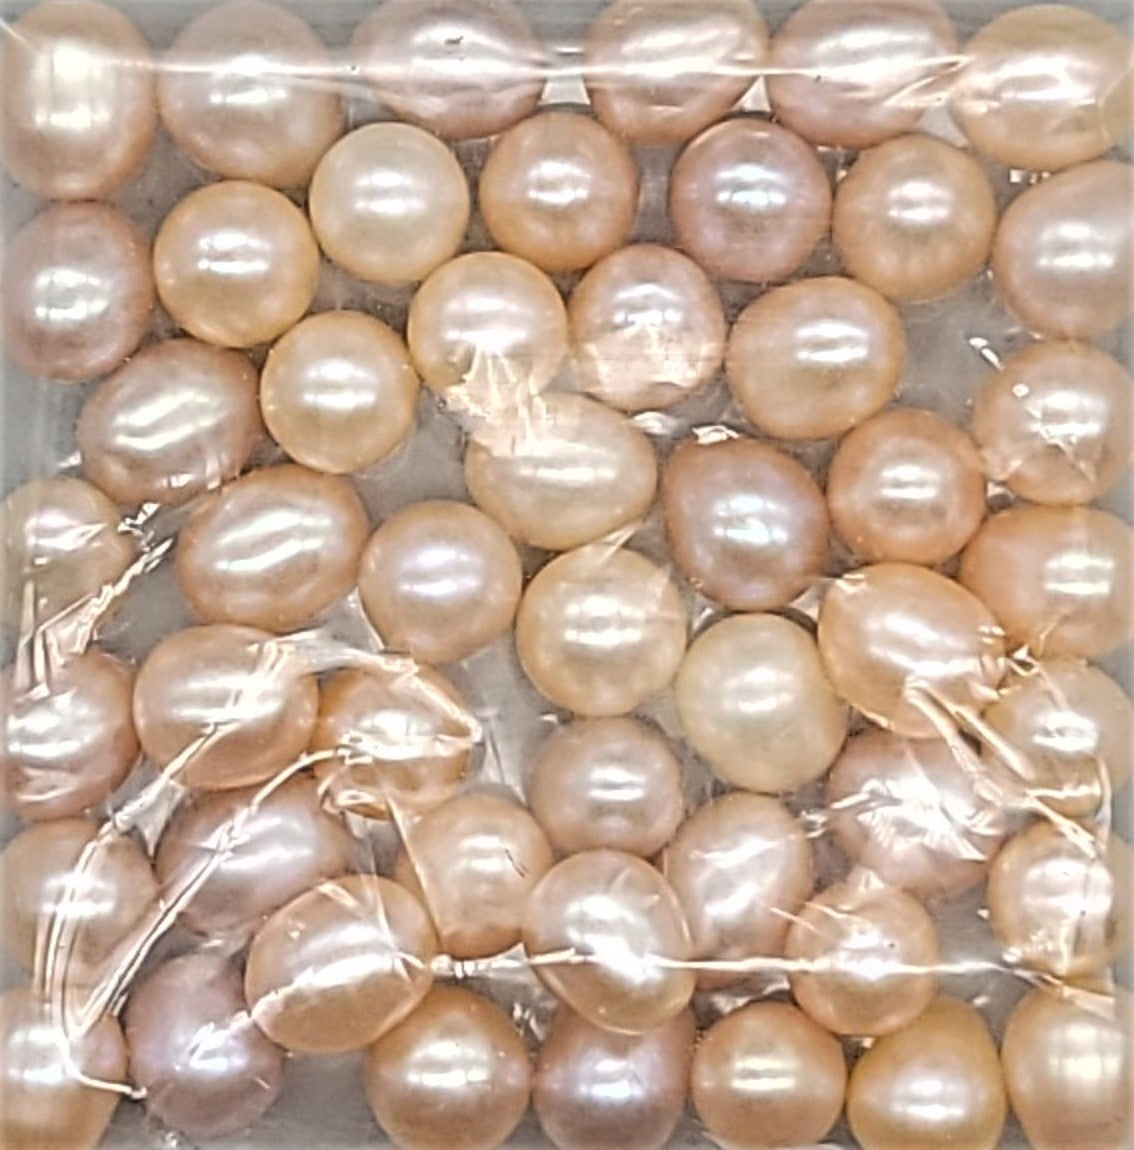 A quality freshwater pearls, 5-6mm x 3.5-4.5mm ovals. Vintage 1990s. –  Earthly Adornments